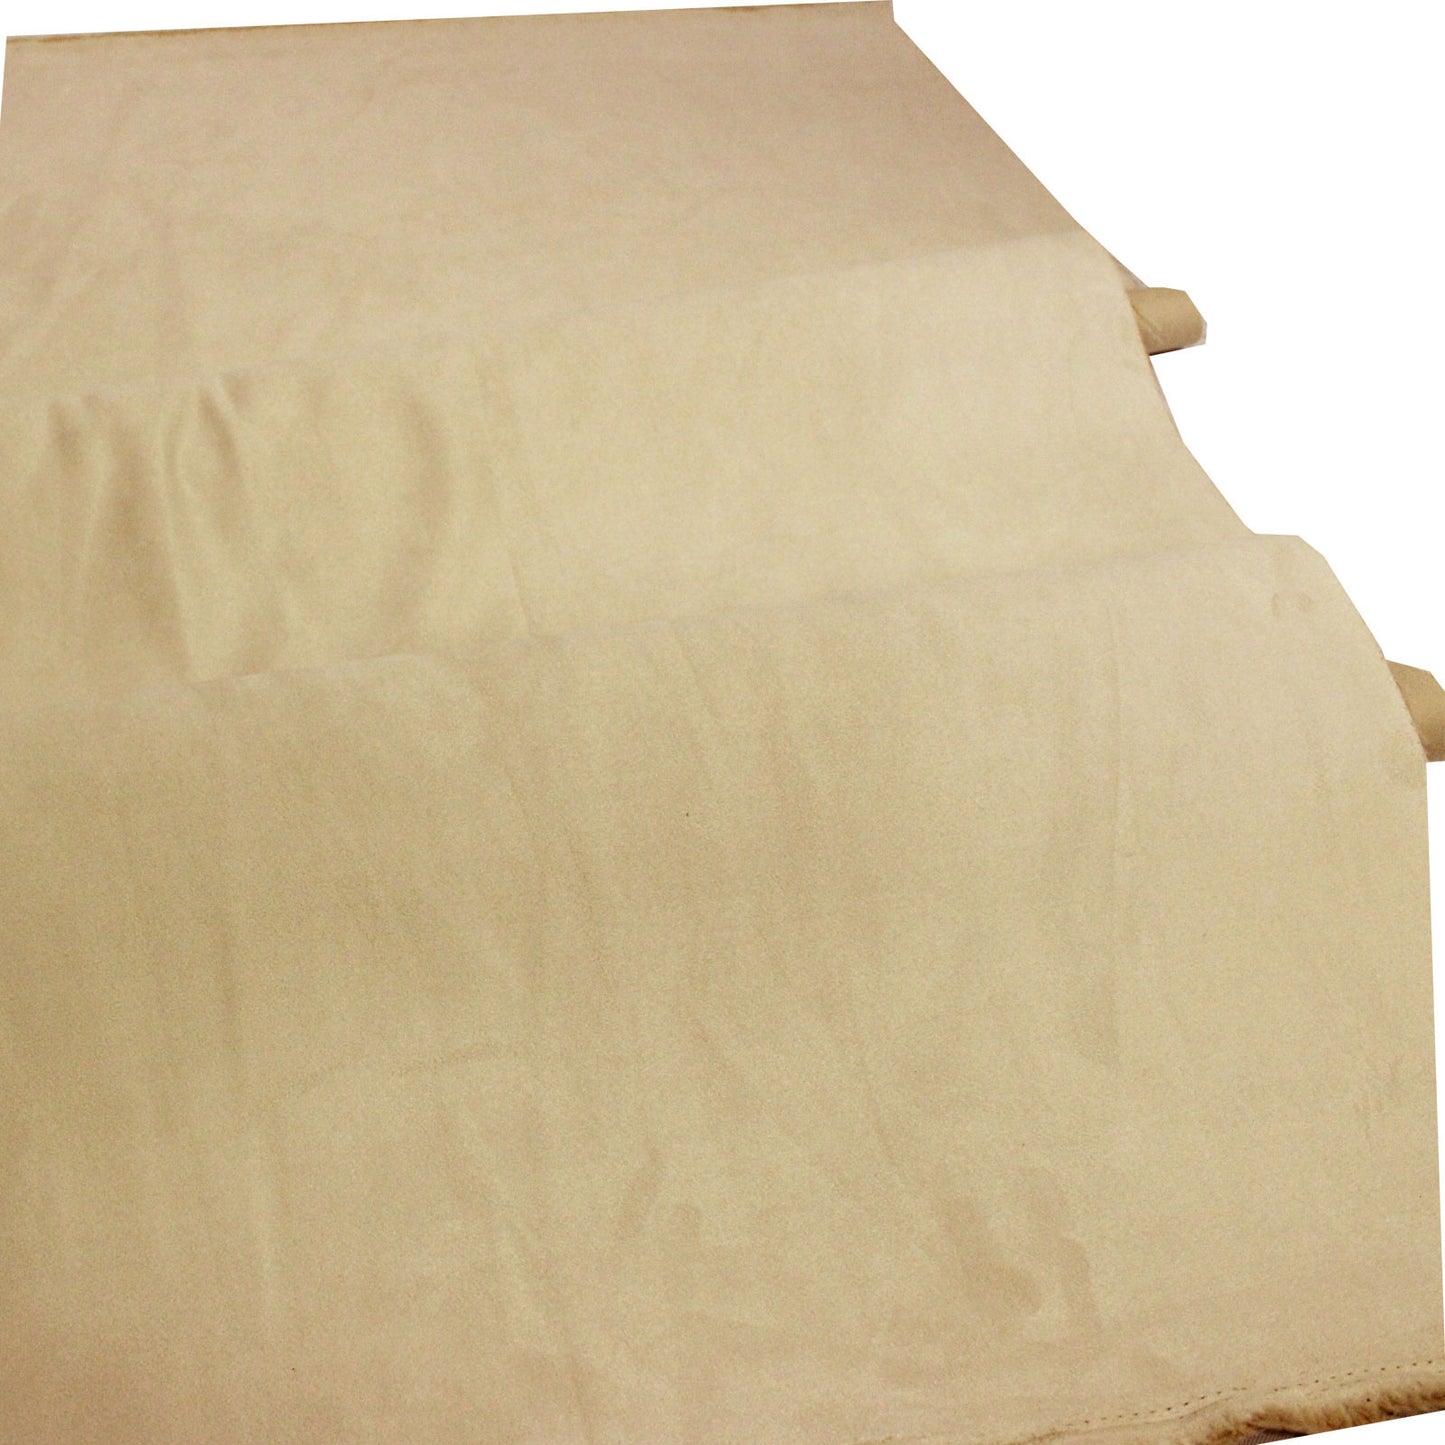 parchment  Suede Microsuede Fabric Upholstery Drapery Fabric by the yard